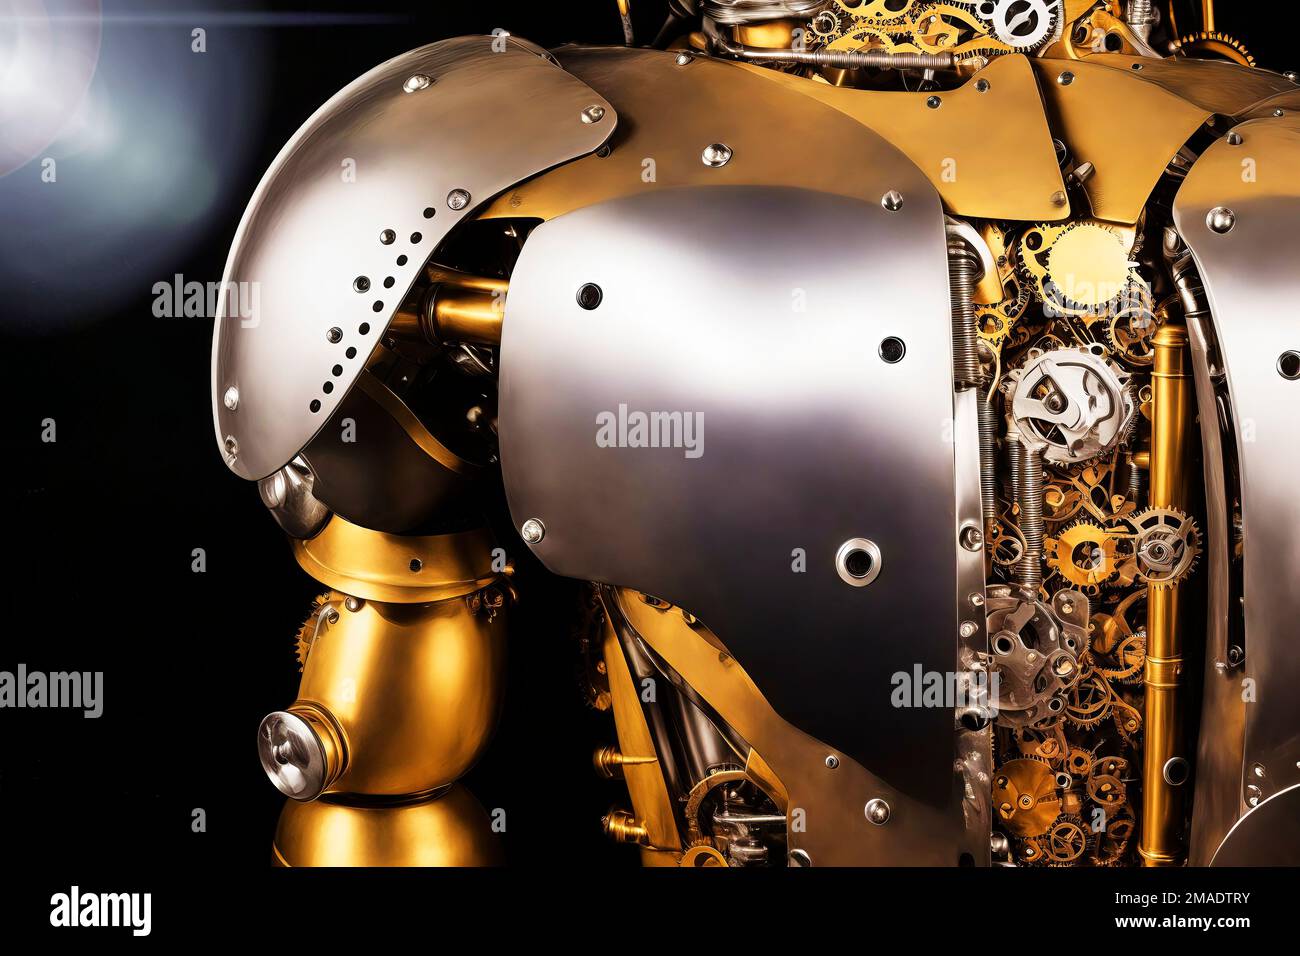 Half length portrait of an android robot wearing biomechanical armor with copper plates and silver plates showing gears, screws and cables, made with Stock Photo